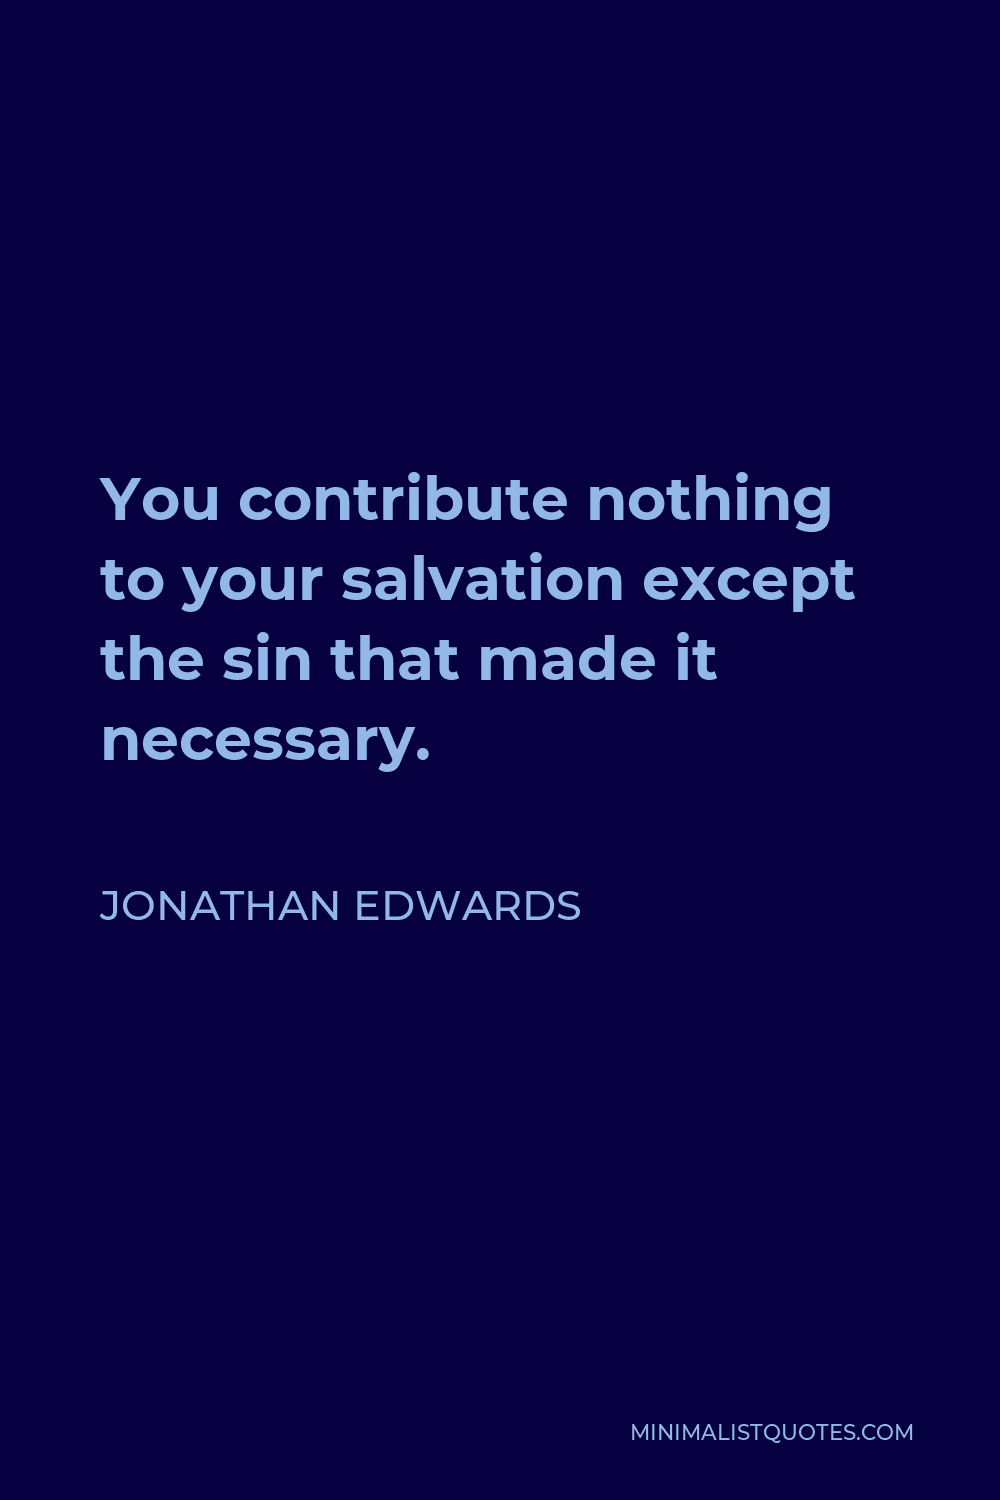 Jonathan Edwards Quote - You contribute nothing to your salvation except the sin that made it necessary.